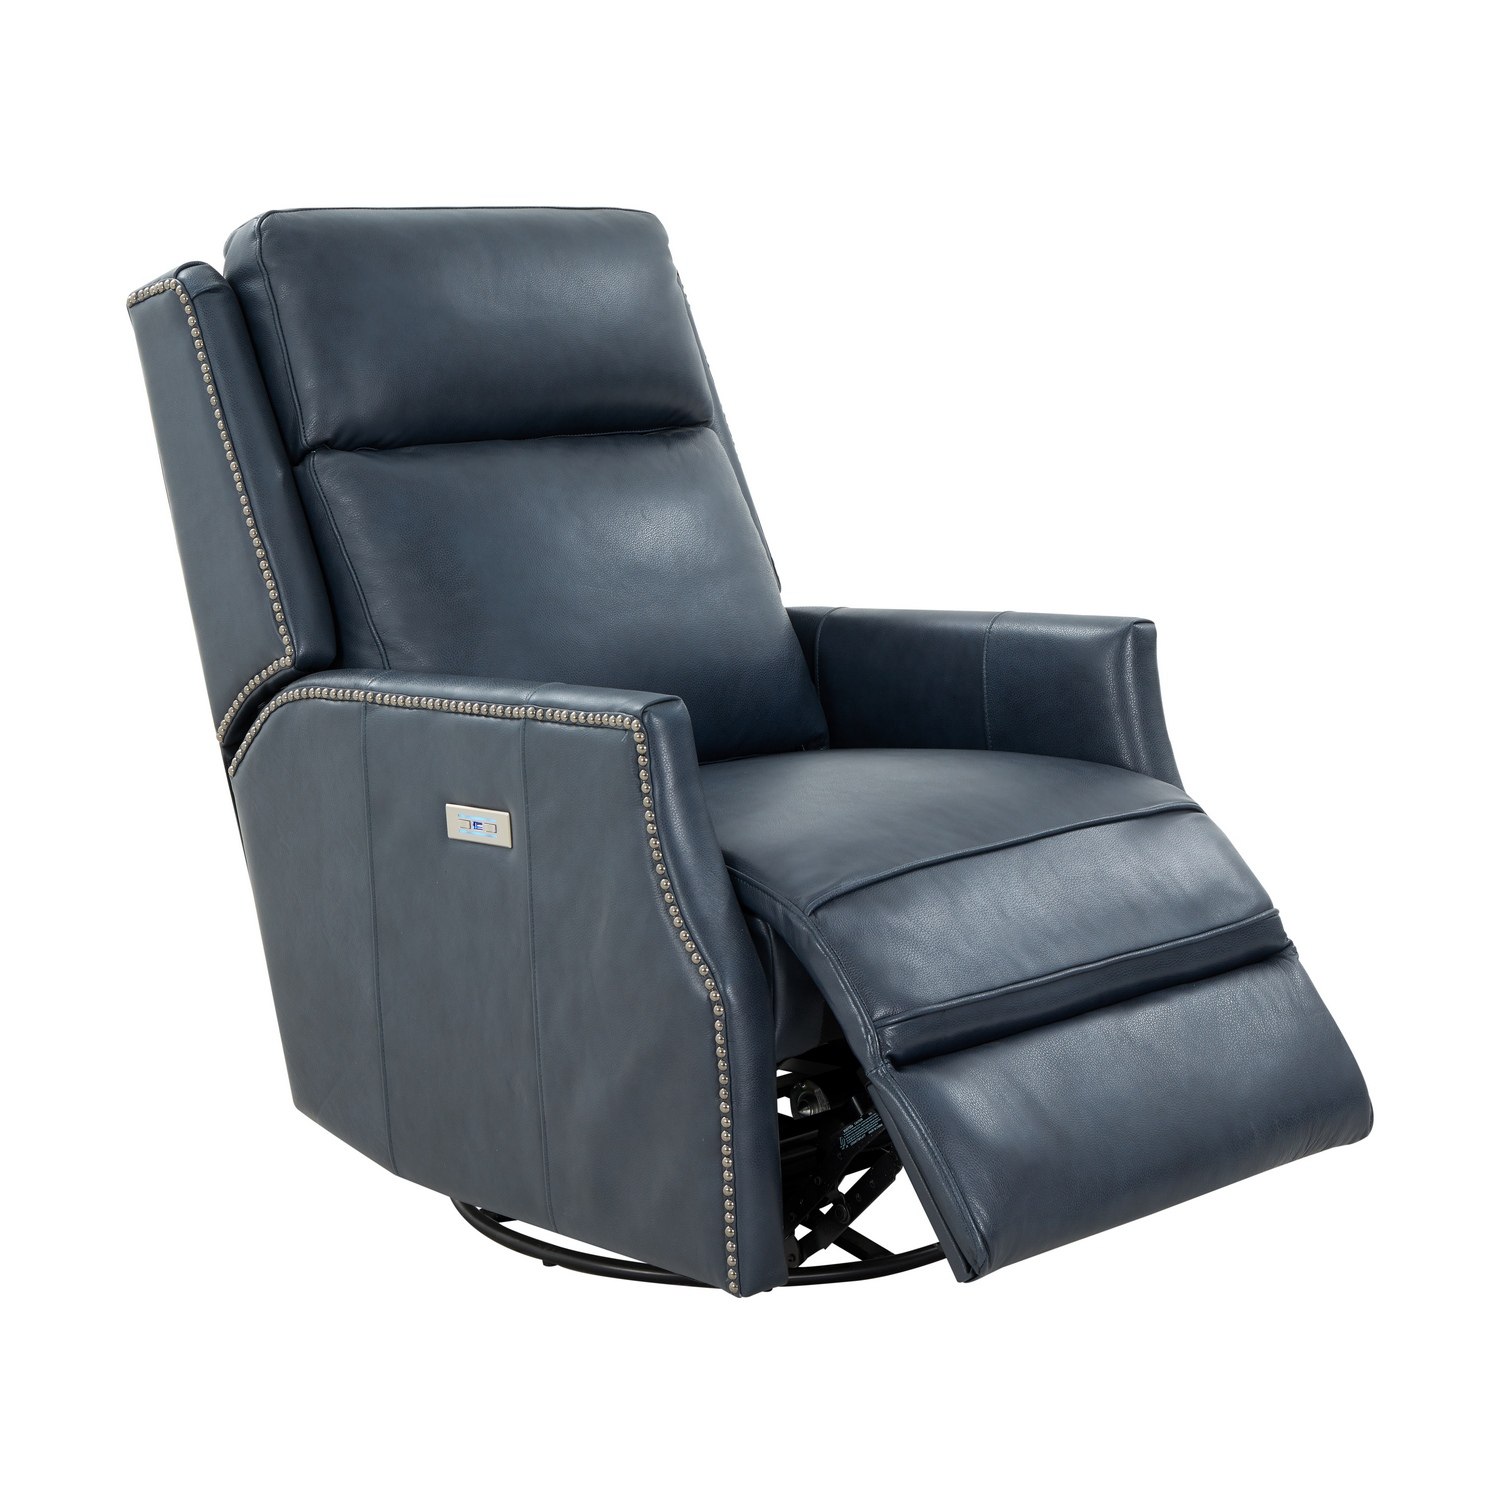 Barcalounger Cavill Swivel Glider Recliner Chair with Power Recline and Power Head Rest - Barone Navy Blue/All Leather